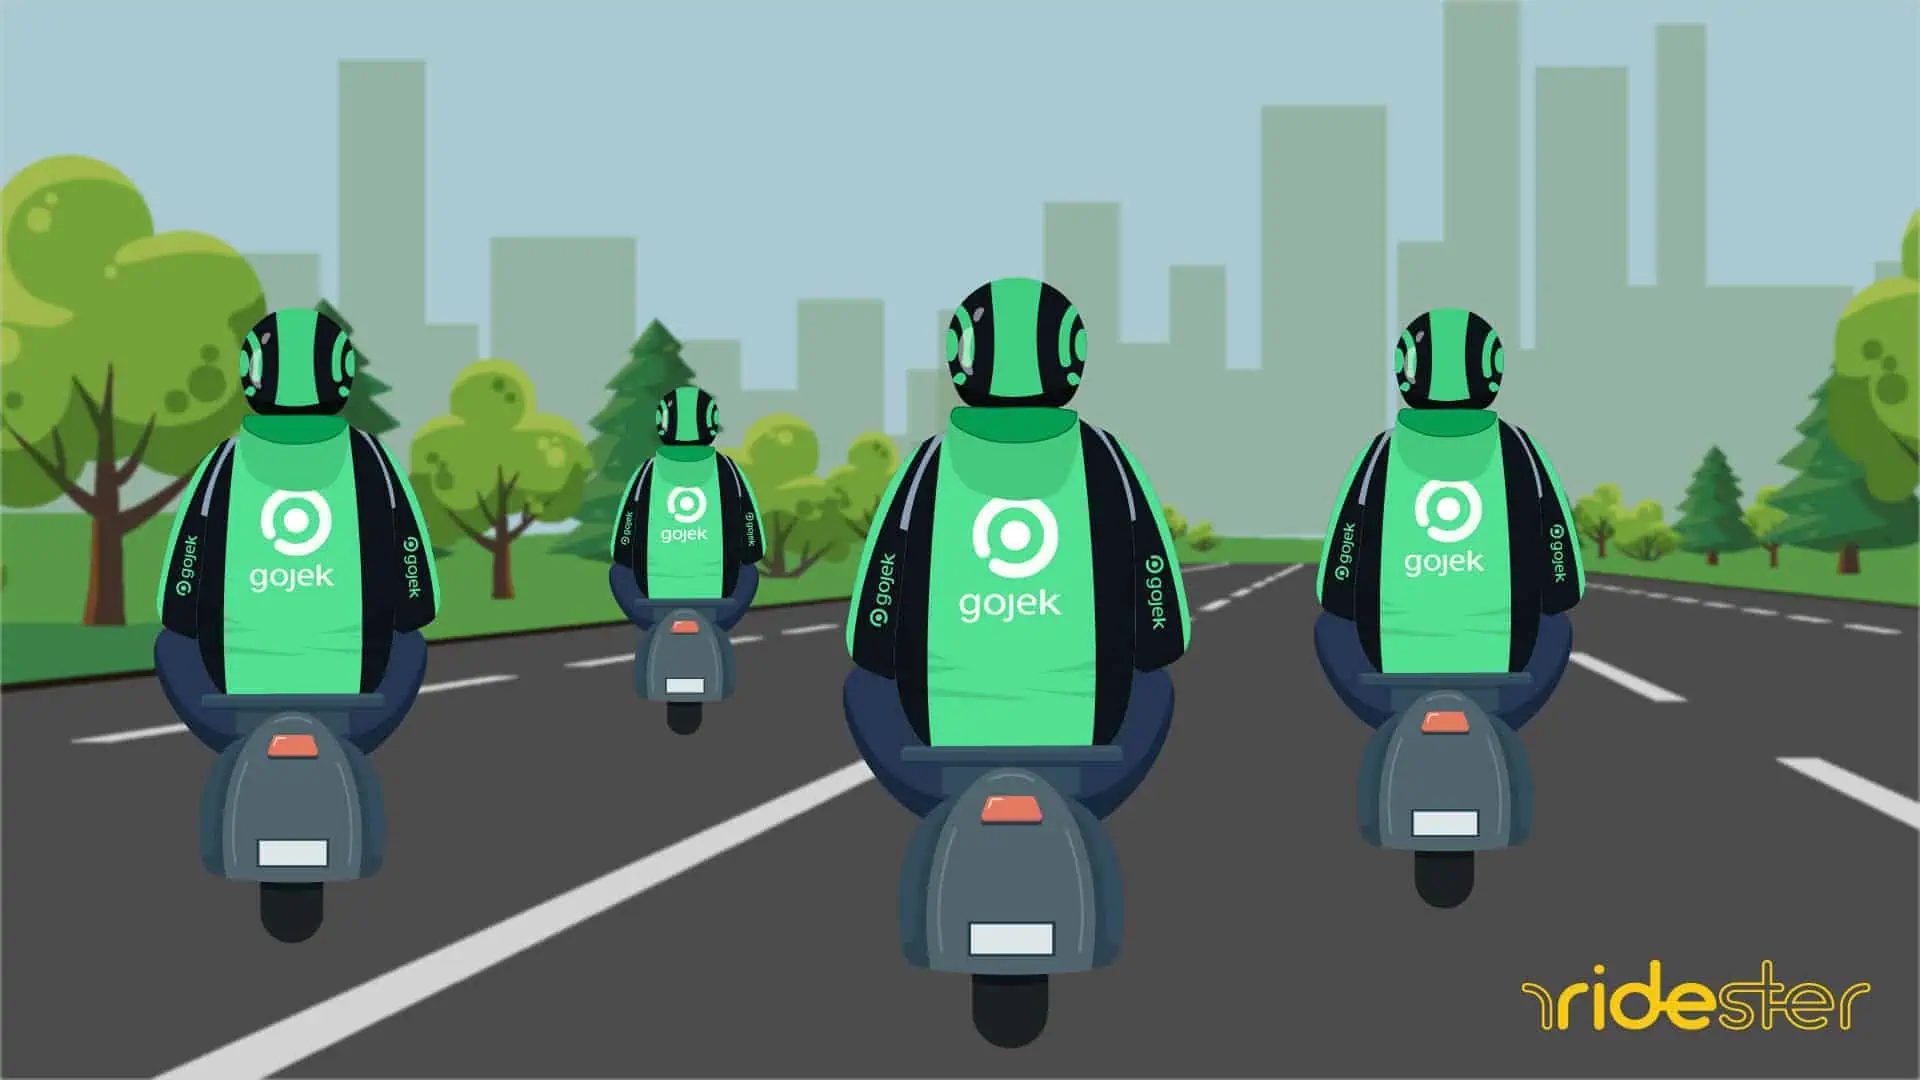 vector graphic showing GoJek riders on mopeds riding around a city in a group